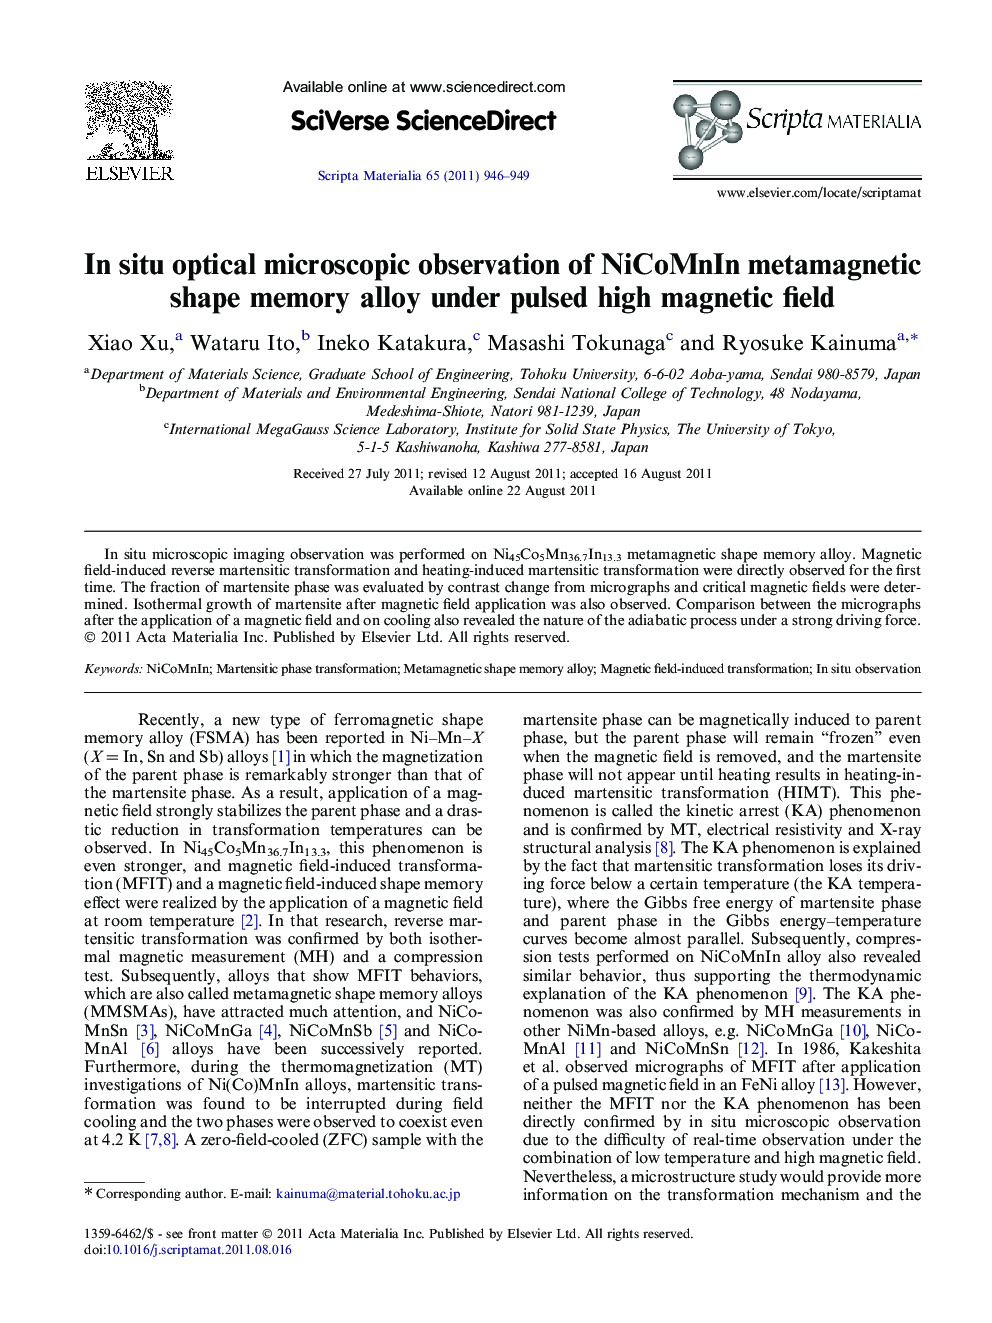 In situ optical microscopic observation of NiCoMnIn metamagnetic shape memory alloy under pulsed high magnetic field